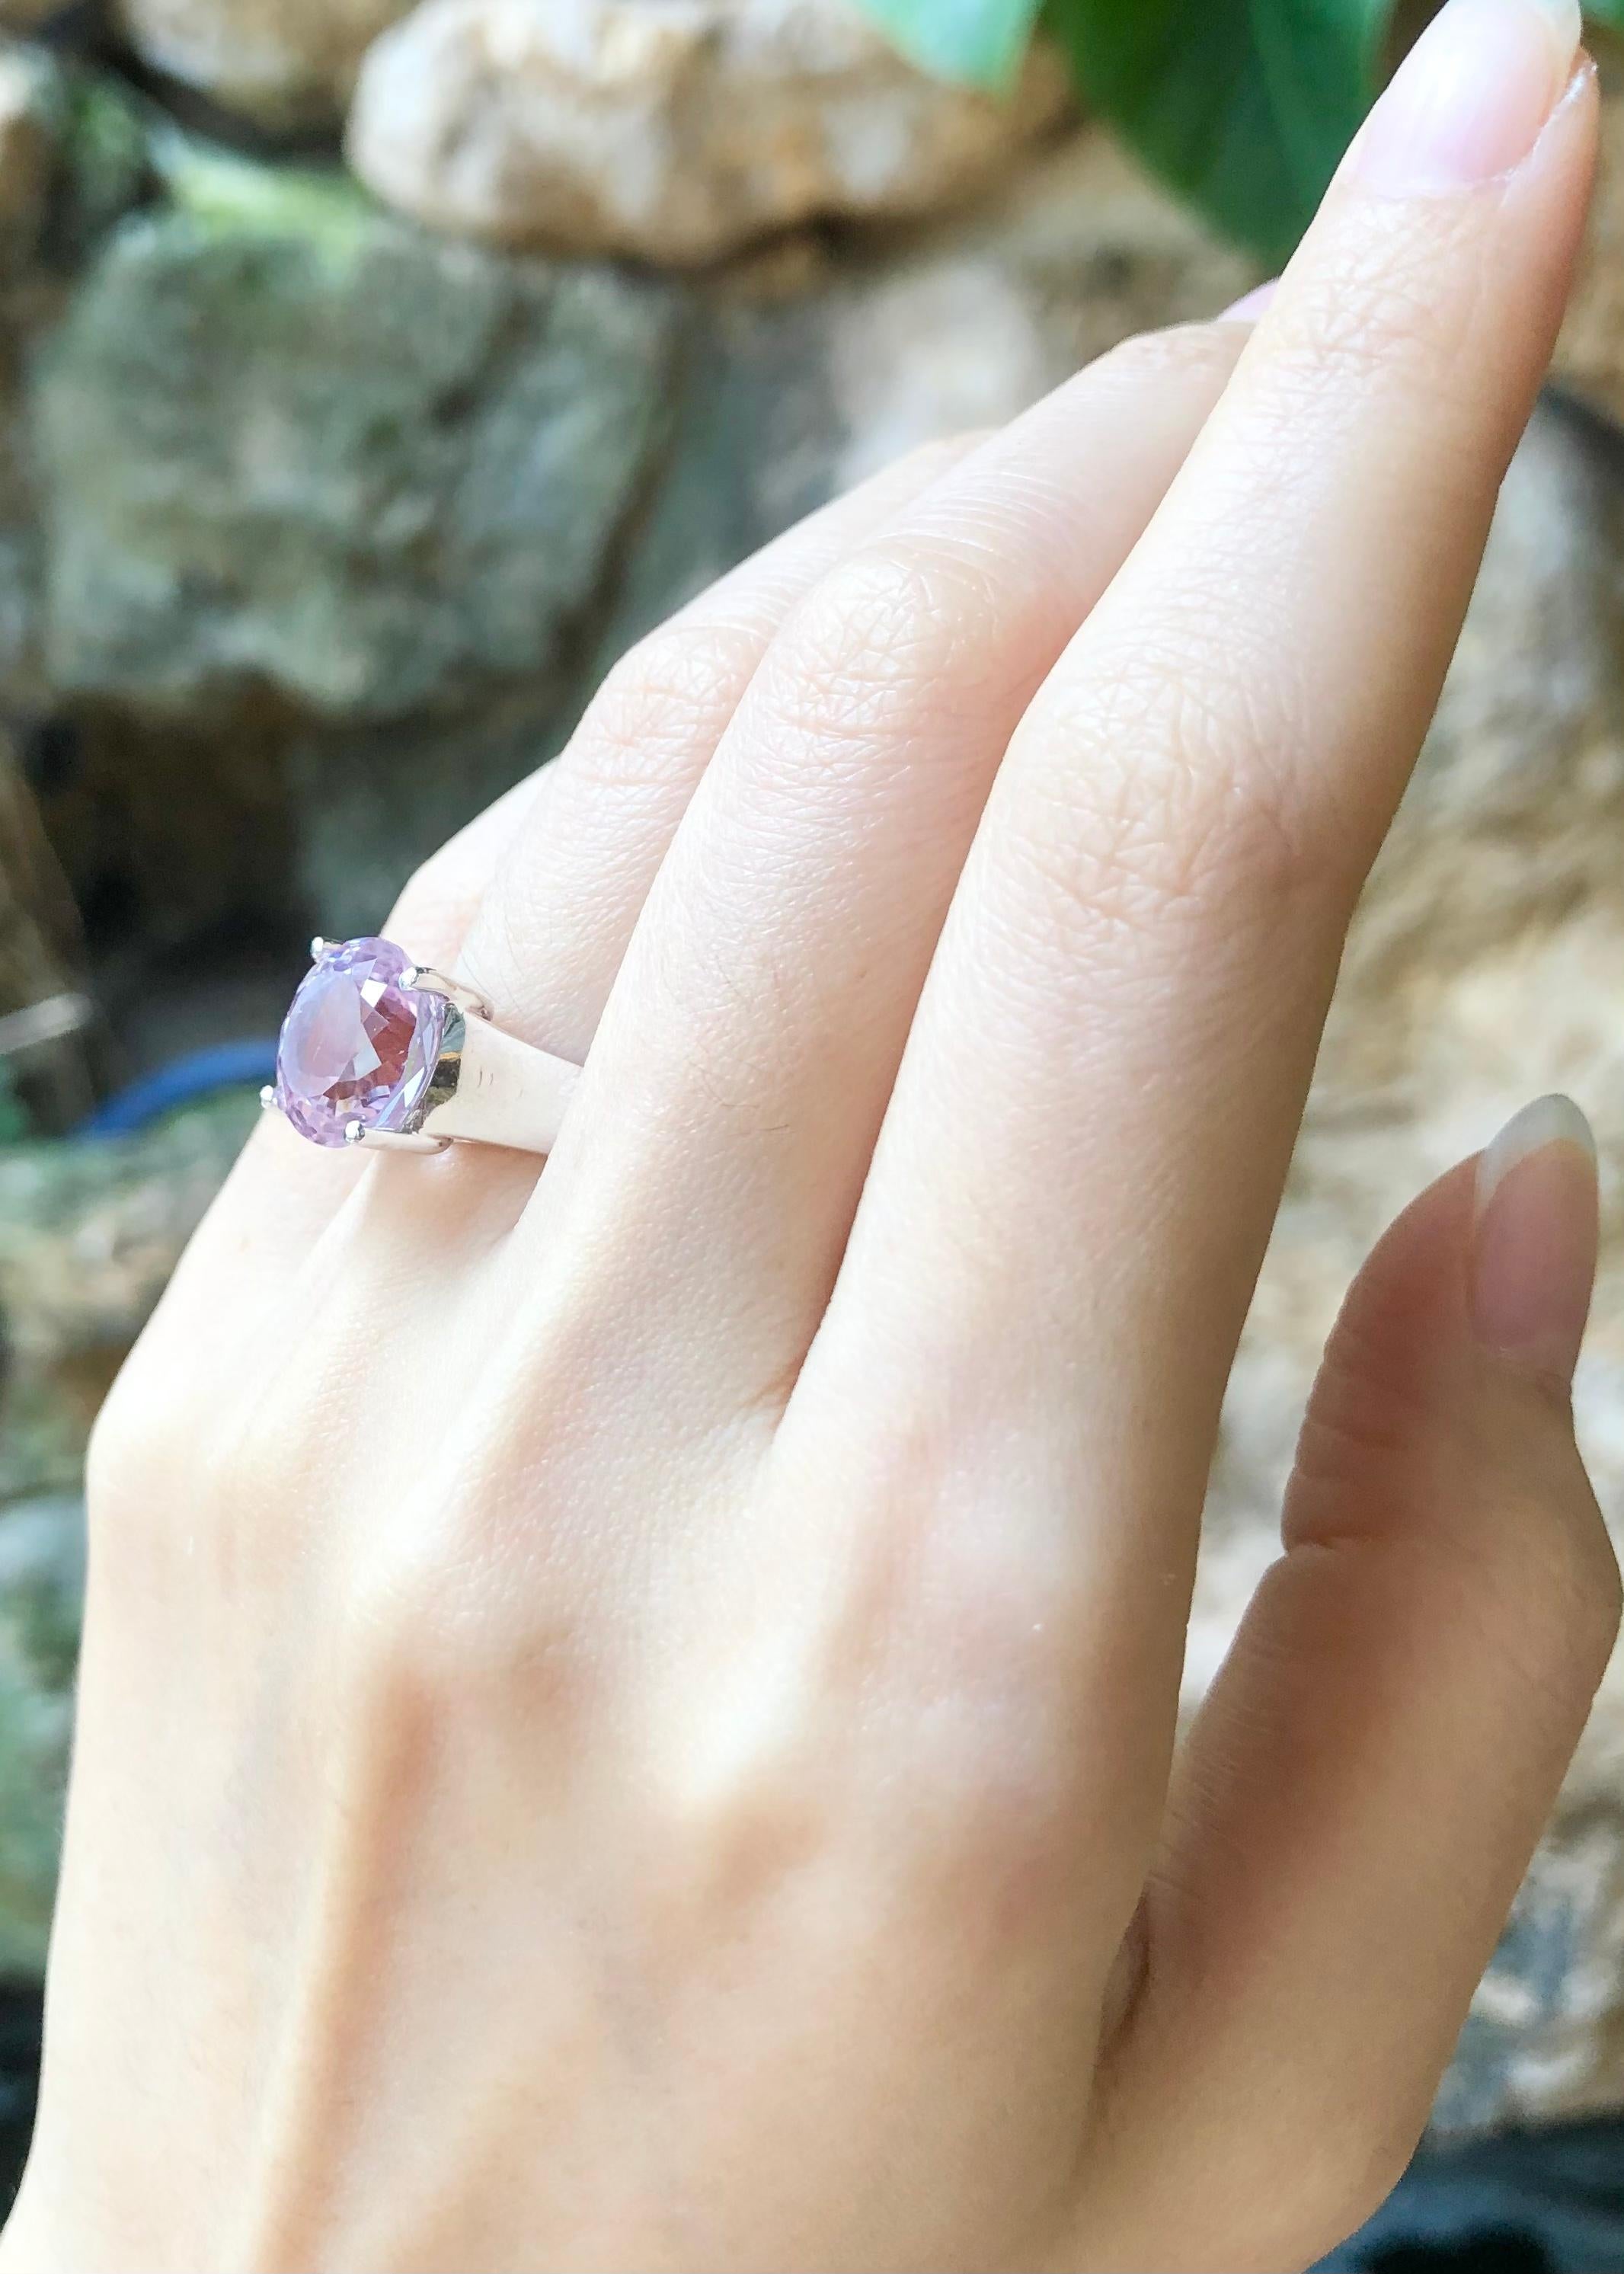 Kunzite 6.38 carats Ring set in Platinum 900 Settings

Width:  1.1 cm 
Length: 1.1 cm
Ring Size: 49
Total Weight: 10.16 grams



